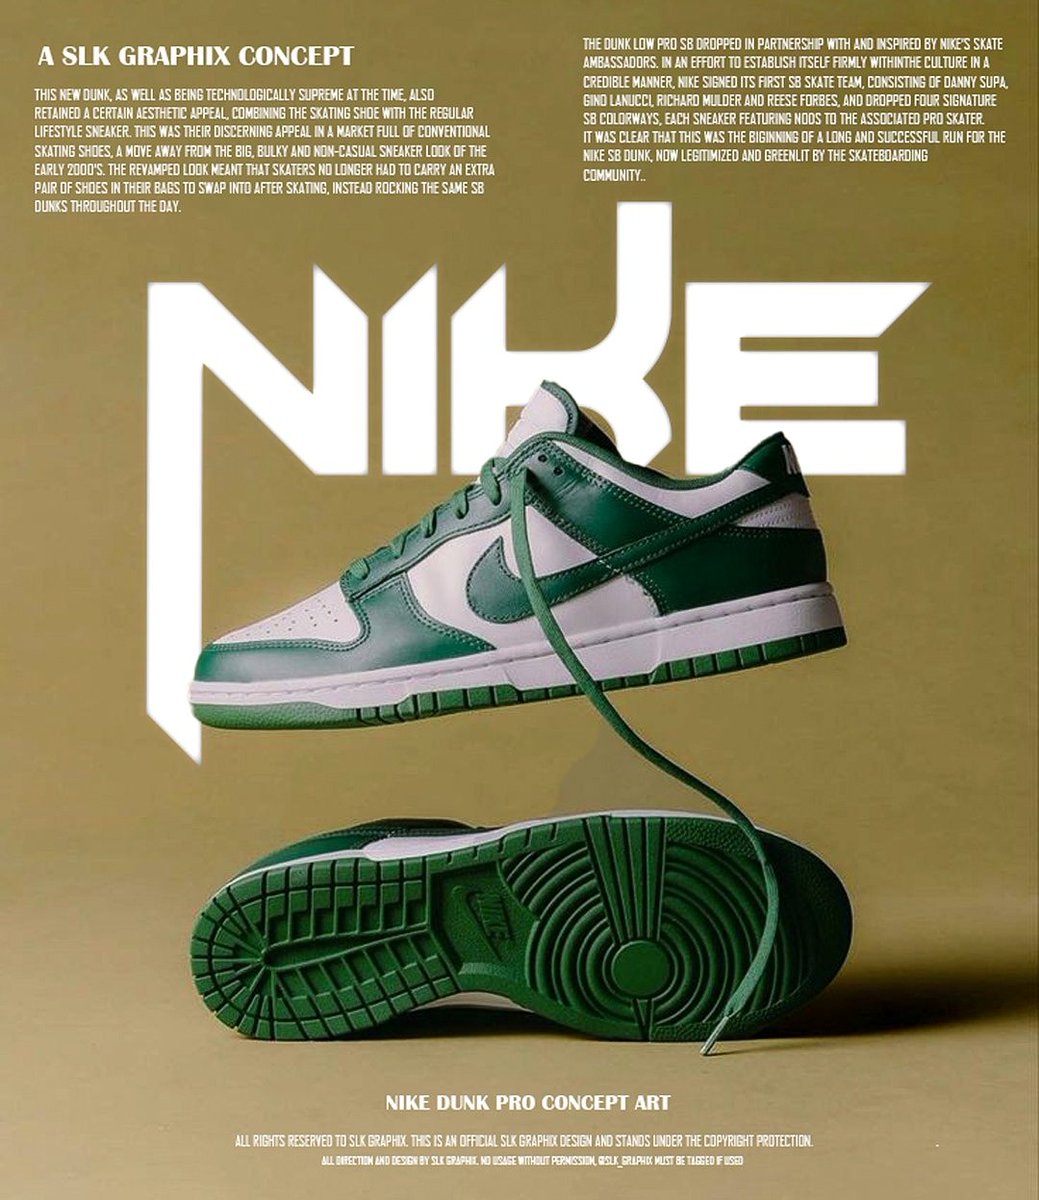 Nike Dunk Pro Low Concept Art
Design by @officialthatow_
Photo @nike 

#typedesign #artoftheday #posteroftheday #designfeed #posterdesign  #grvphicworld  #graphicdesign #culture #explore #getinvolved #posterunion #youaretypography #digitalarchive #icographica #customlettering